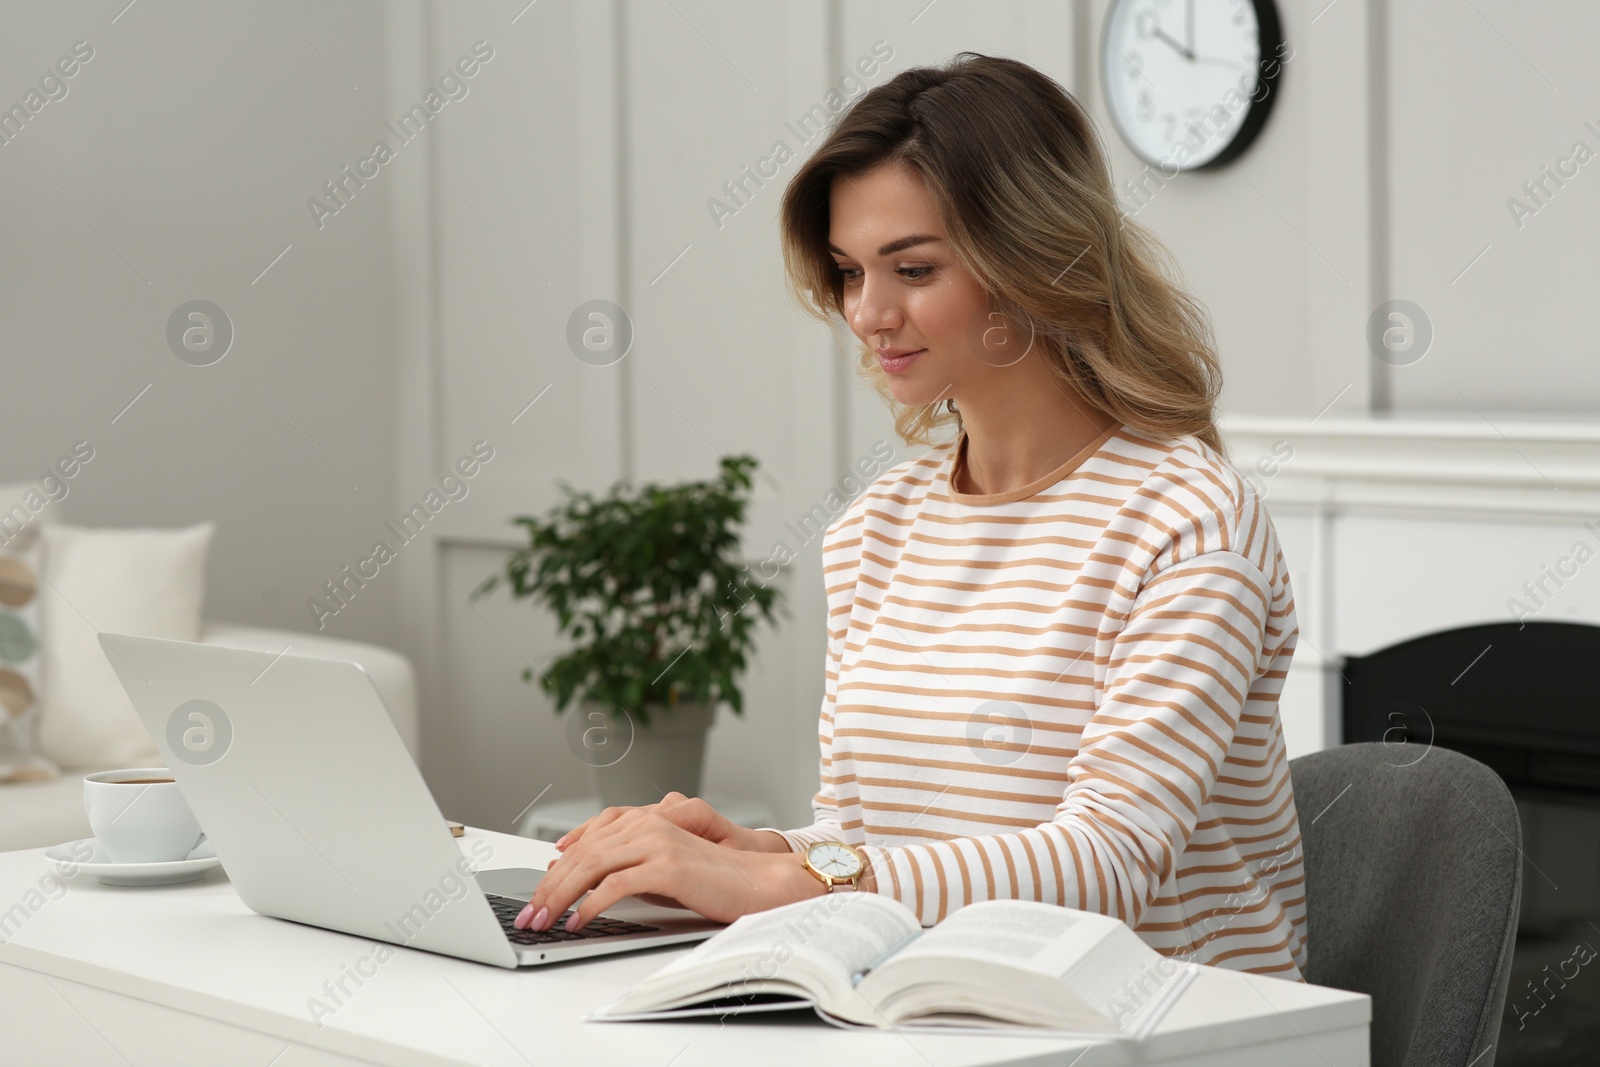 Photo of Online test. Woman studying with laptop at home